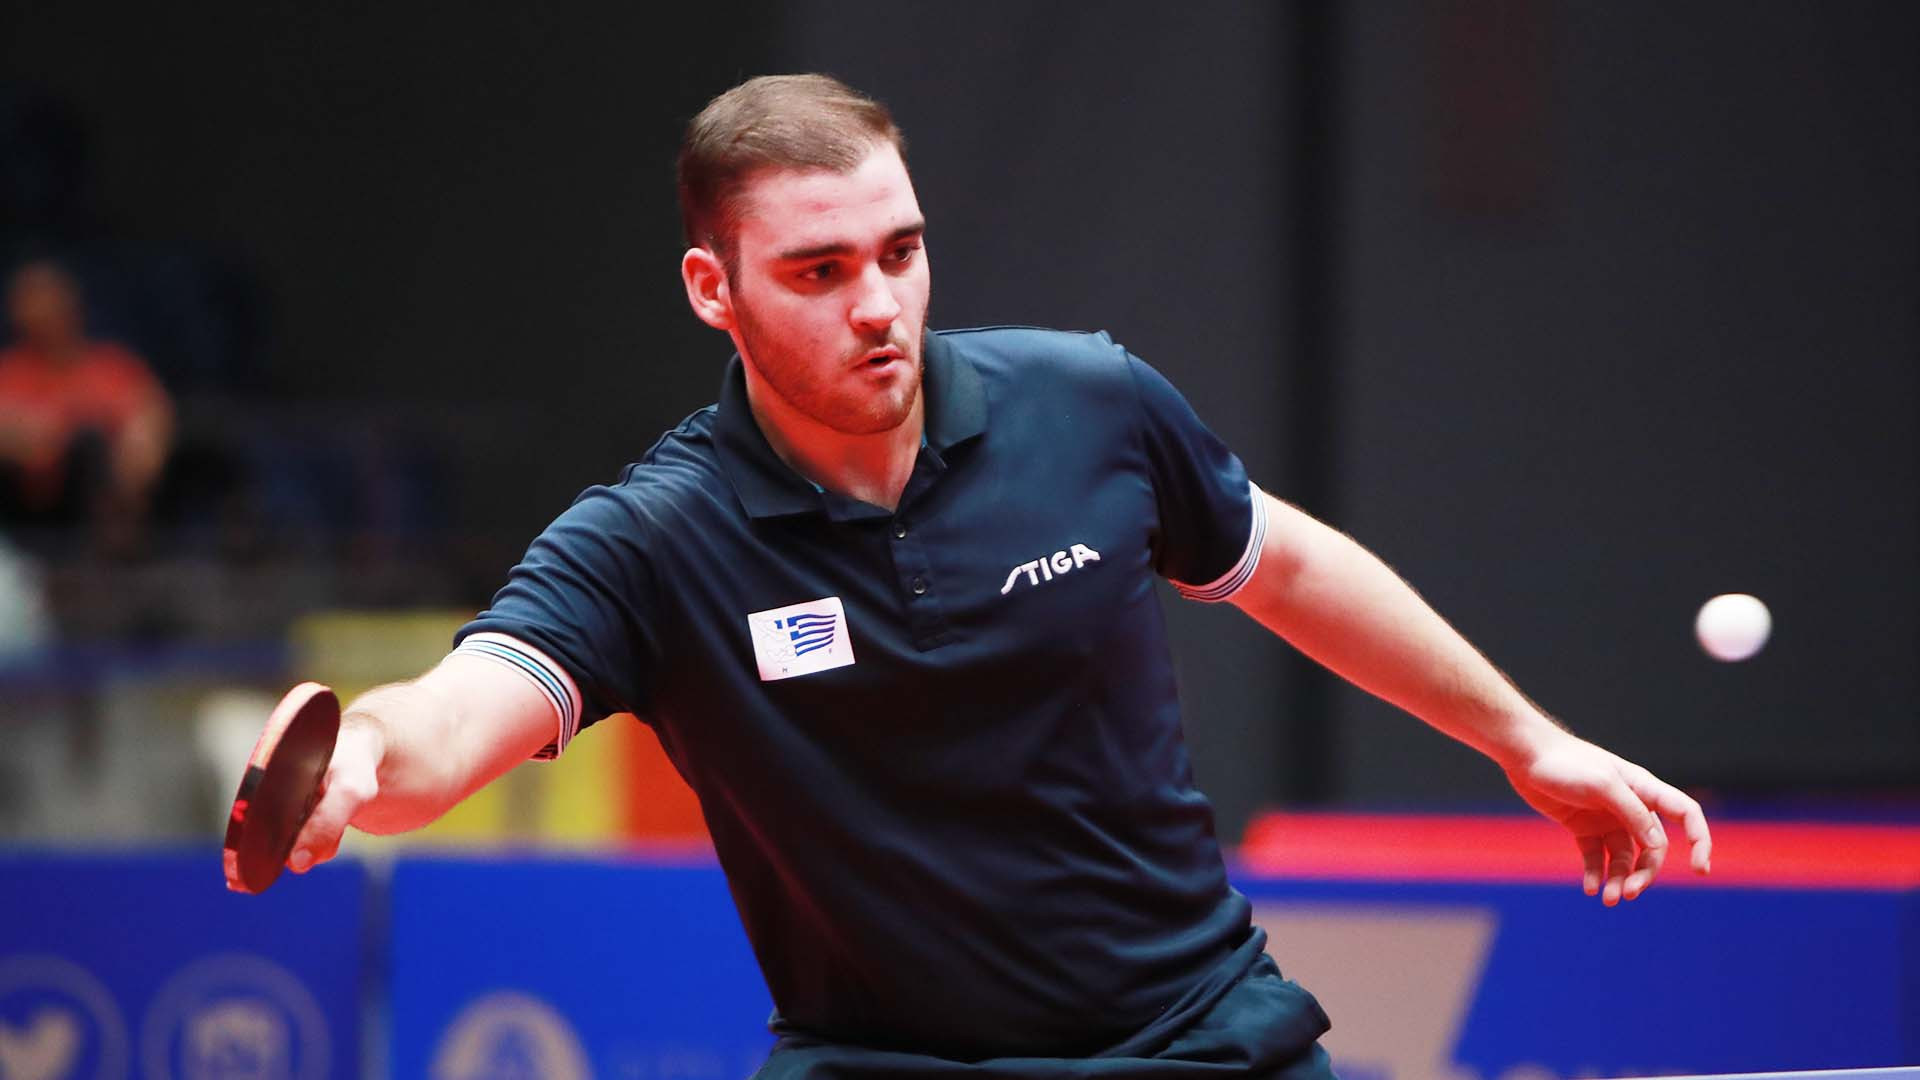 Greece’s fifth-seeded Ioannis Sgouropoulos made a winning start on the second day of individual competition at the ITTF World Junior Champonships in Bendigo ©ITTF